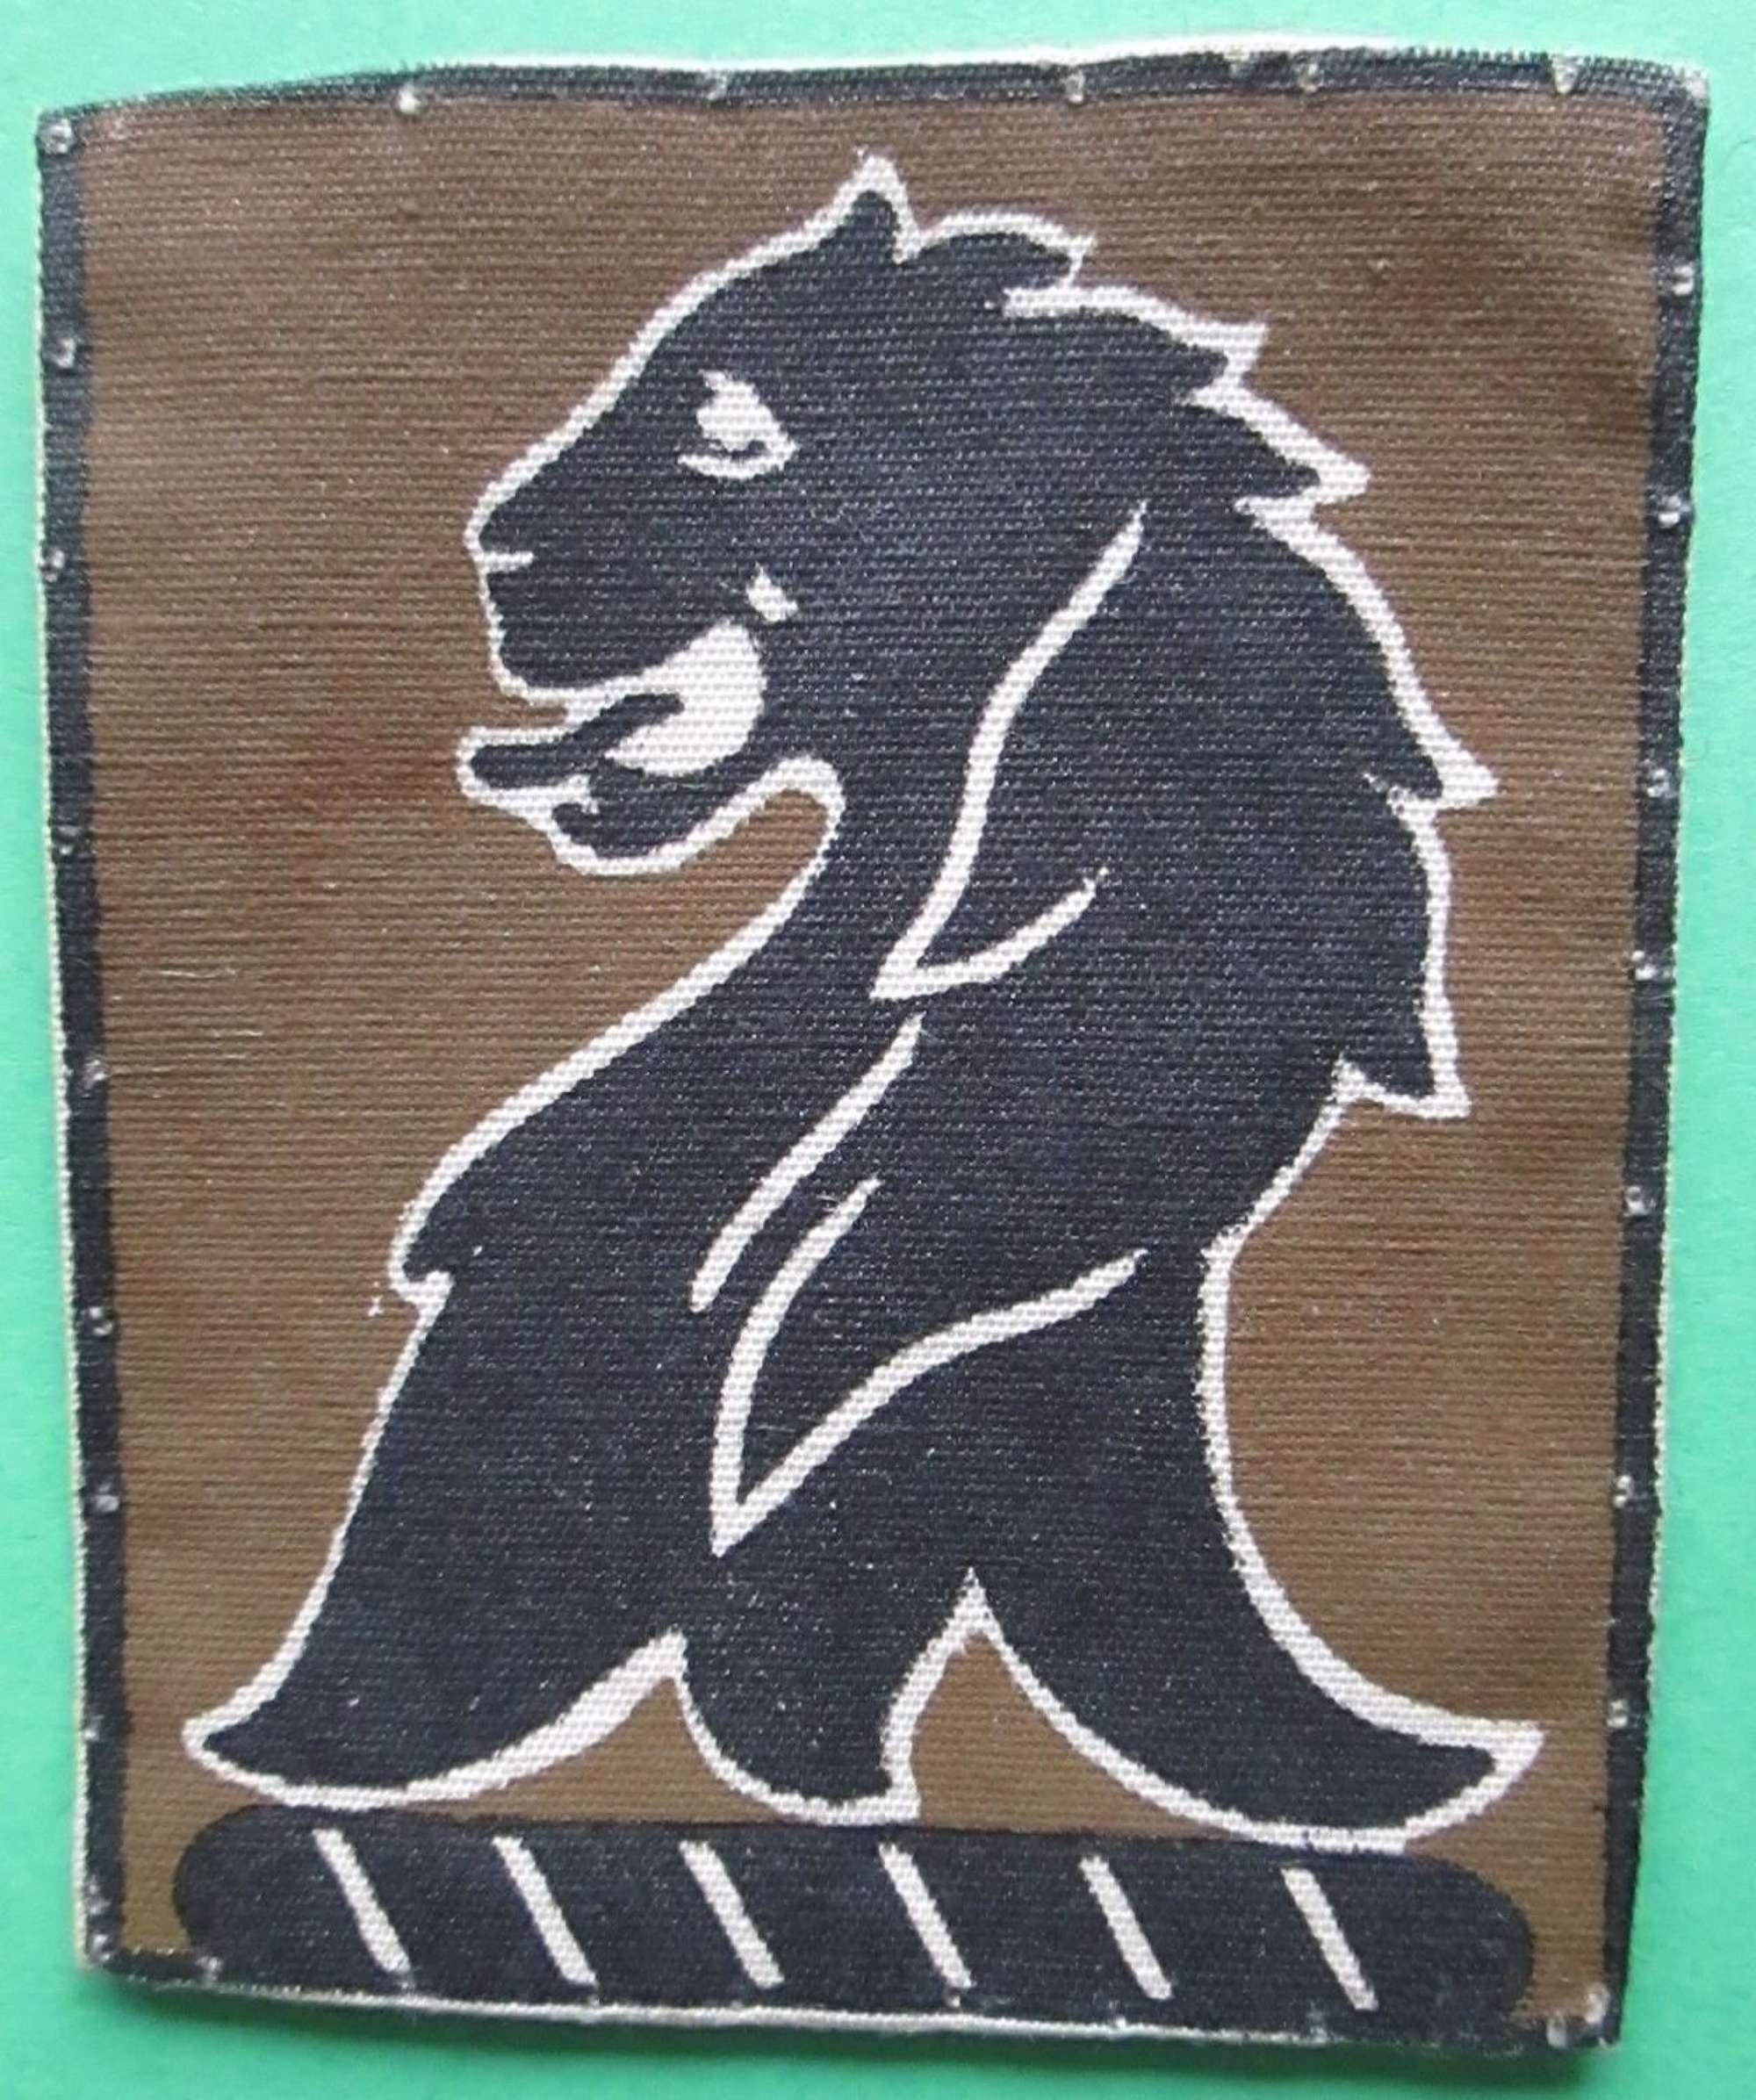 A 10TH ANTI-AIRCRAFT DIVISION PATCH